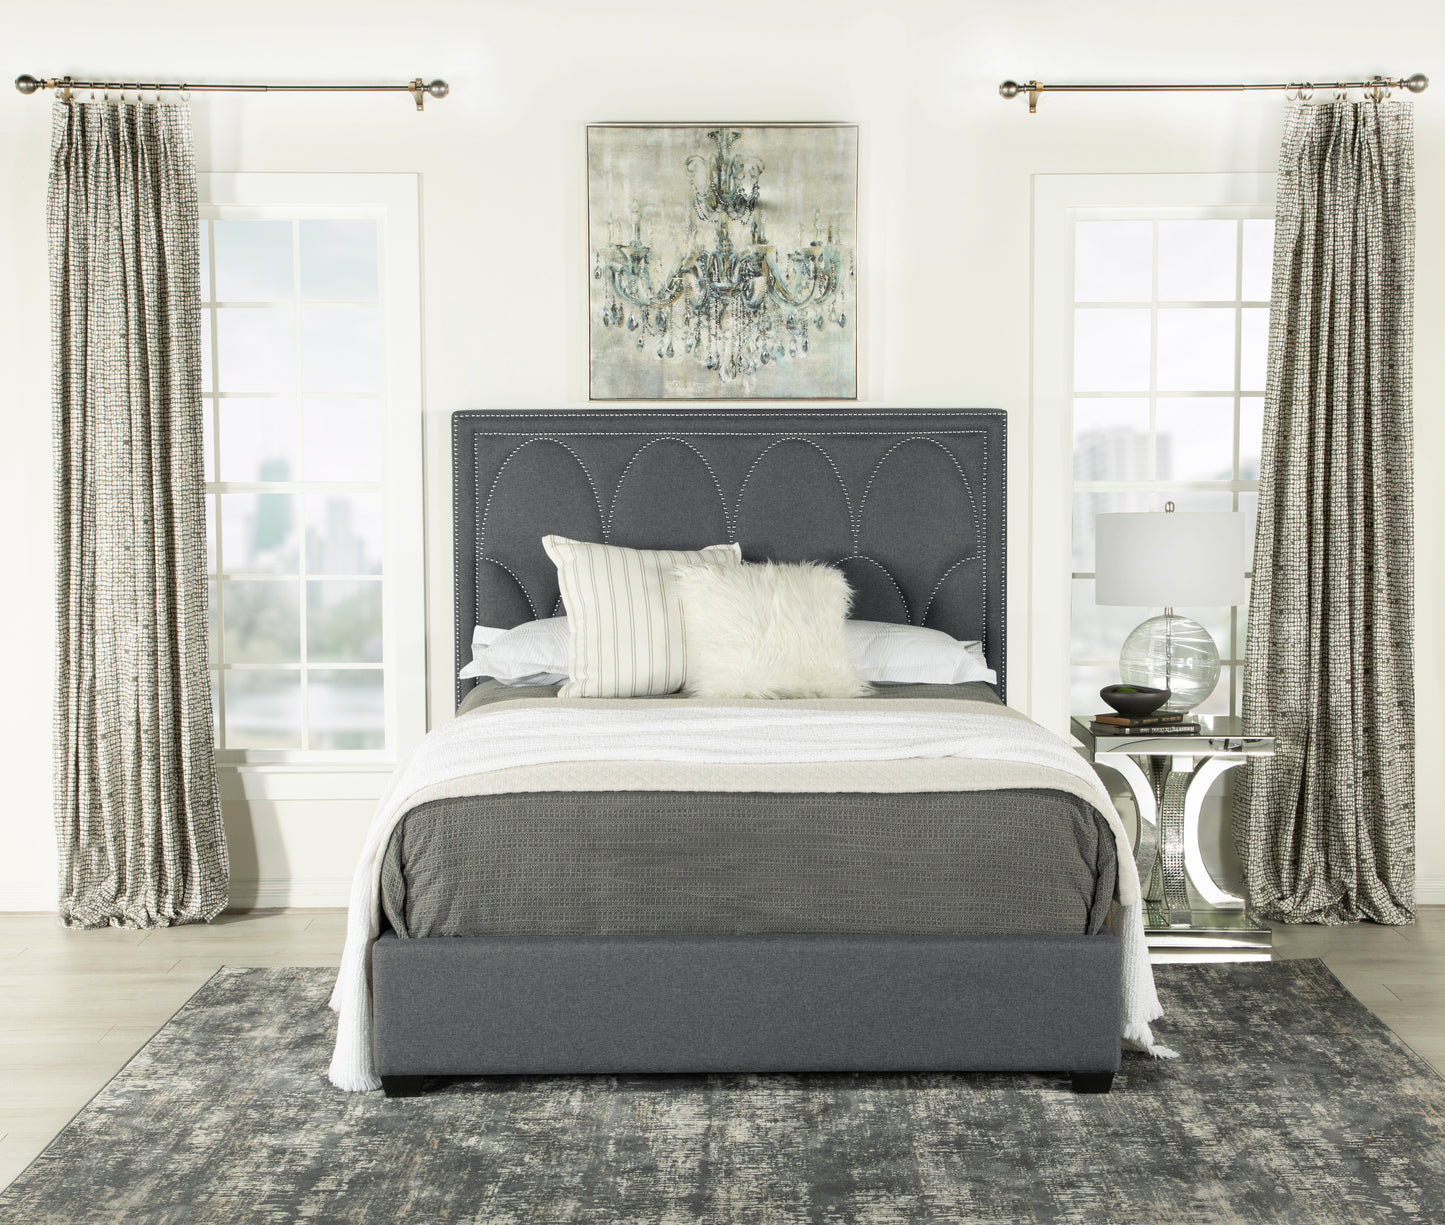 Bowfield Upholstered Bed - Charcoal Fabric